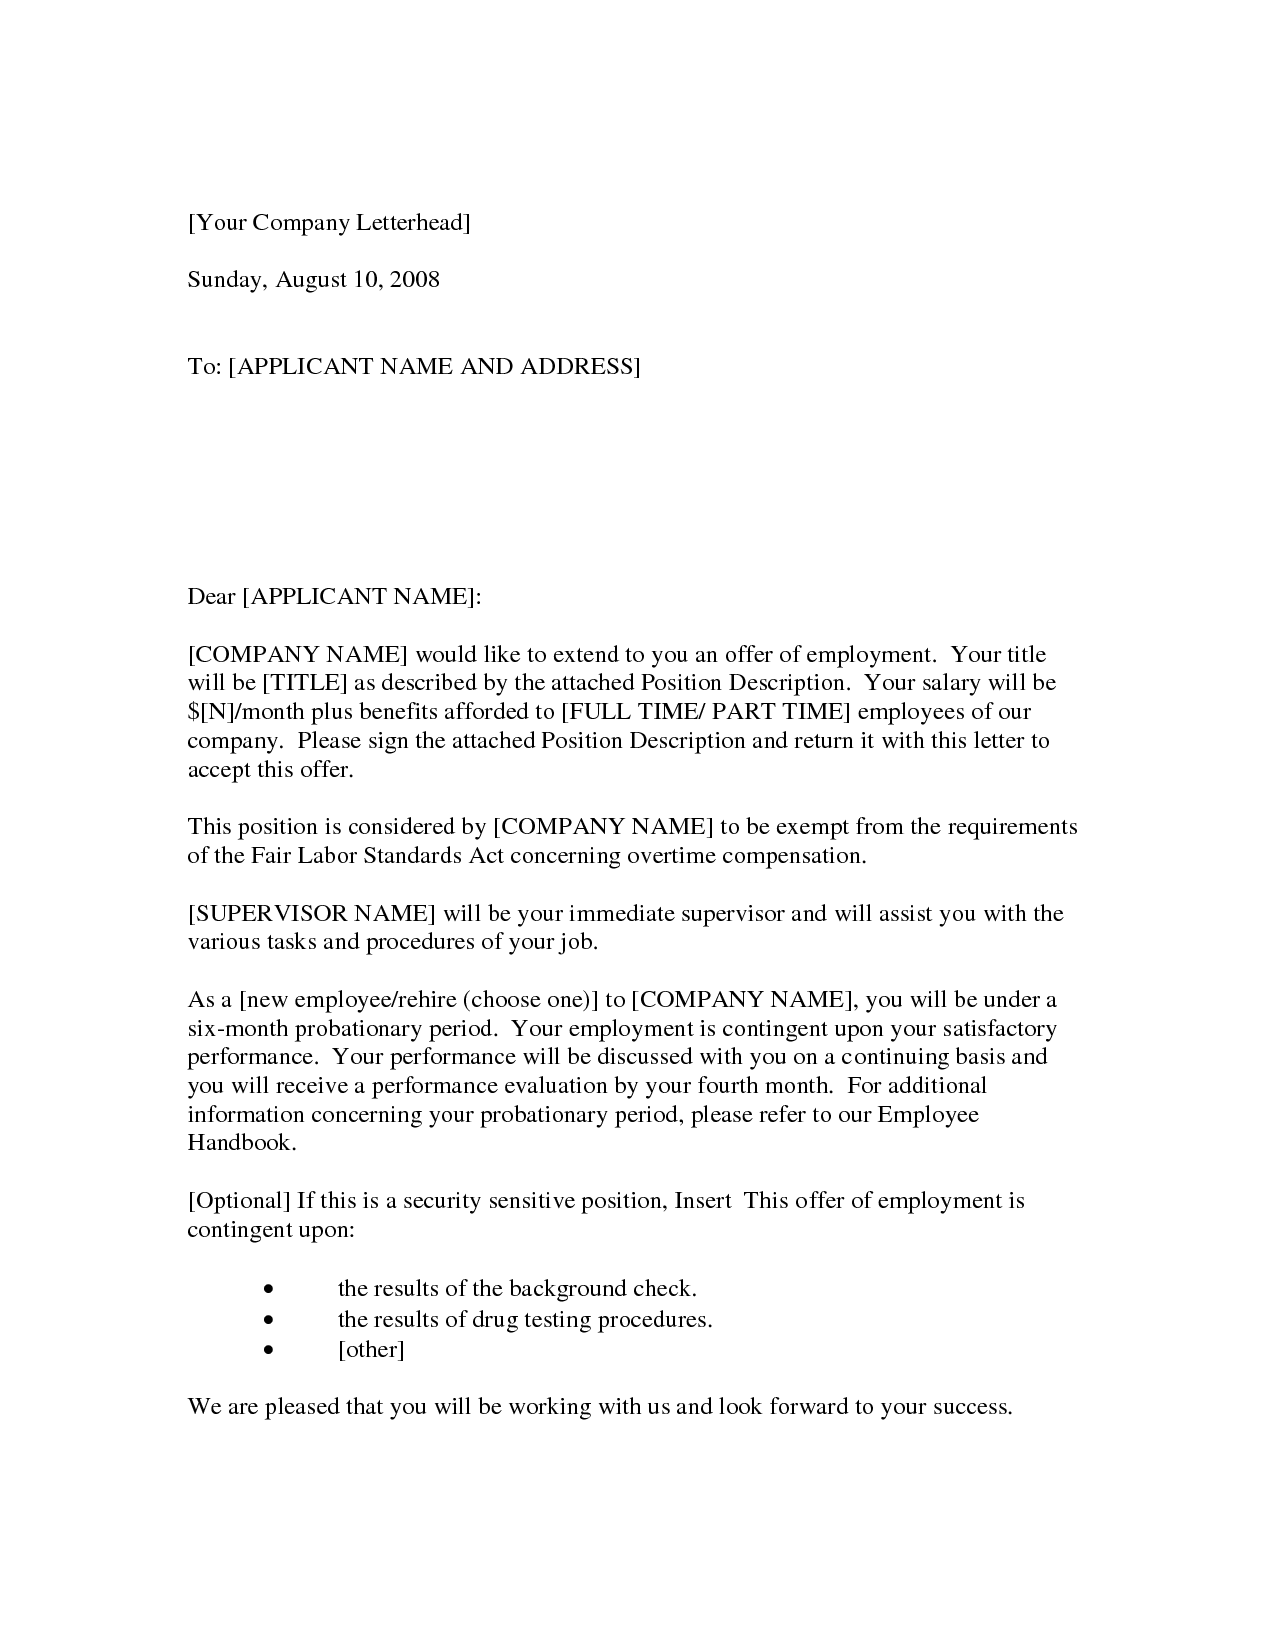 Employment Offer Letter - Free Printable Documents